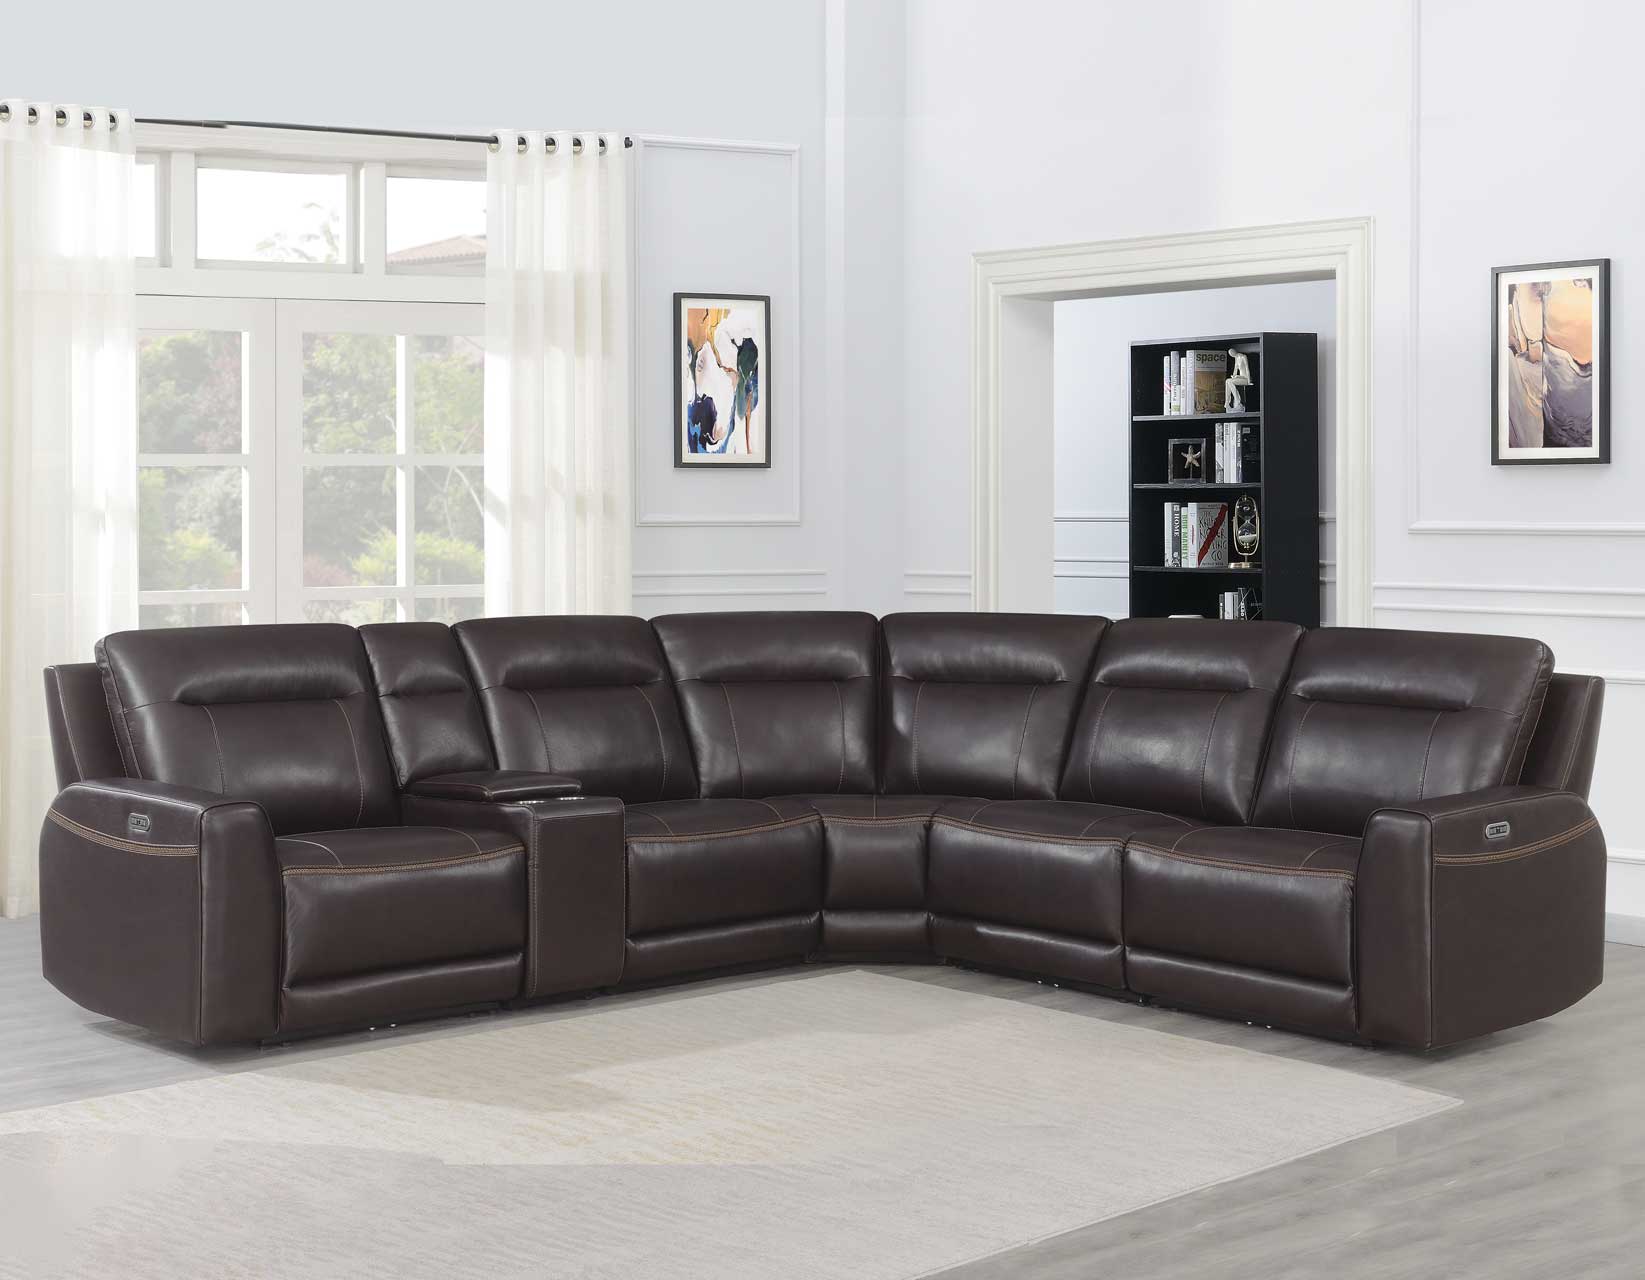 Doncella Dual-Power Leather 6-Piece Sectional (LAFR,RAFR,CN,AC,AR,W) by Steve Silver